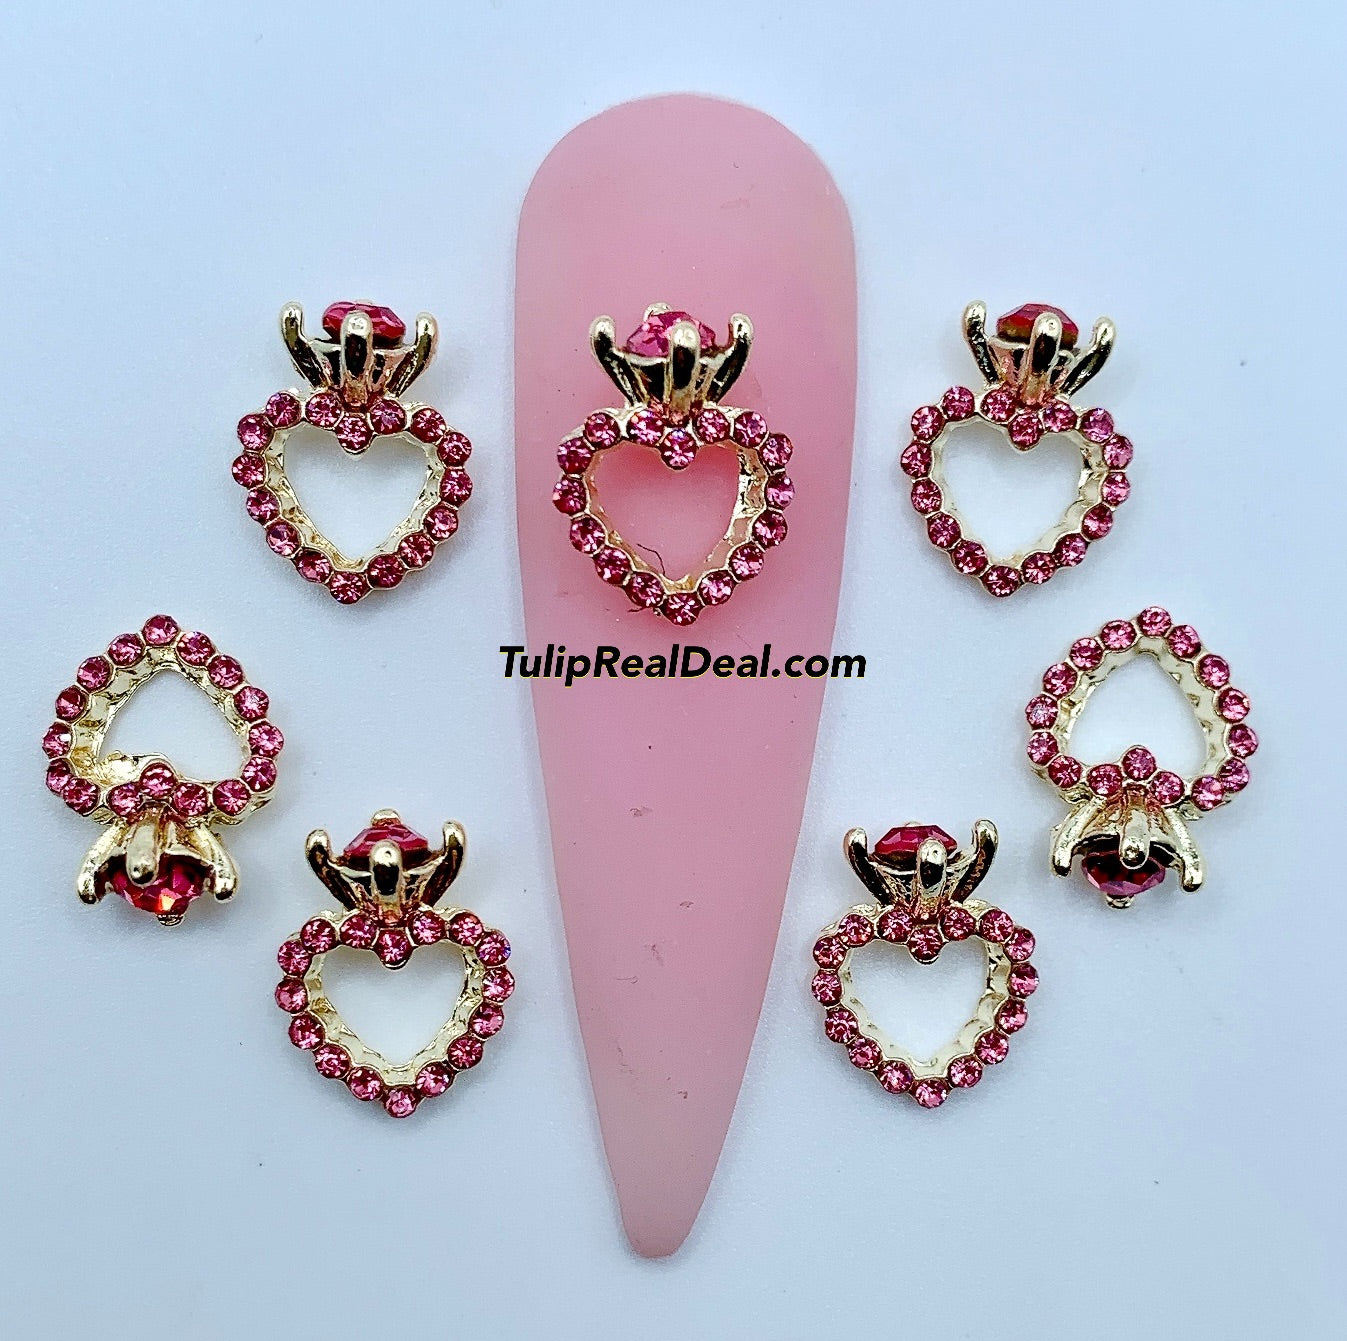 10pcs PINK Bling Heart Charms